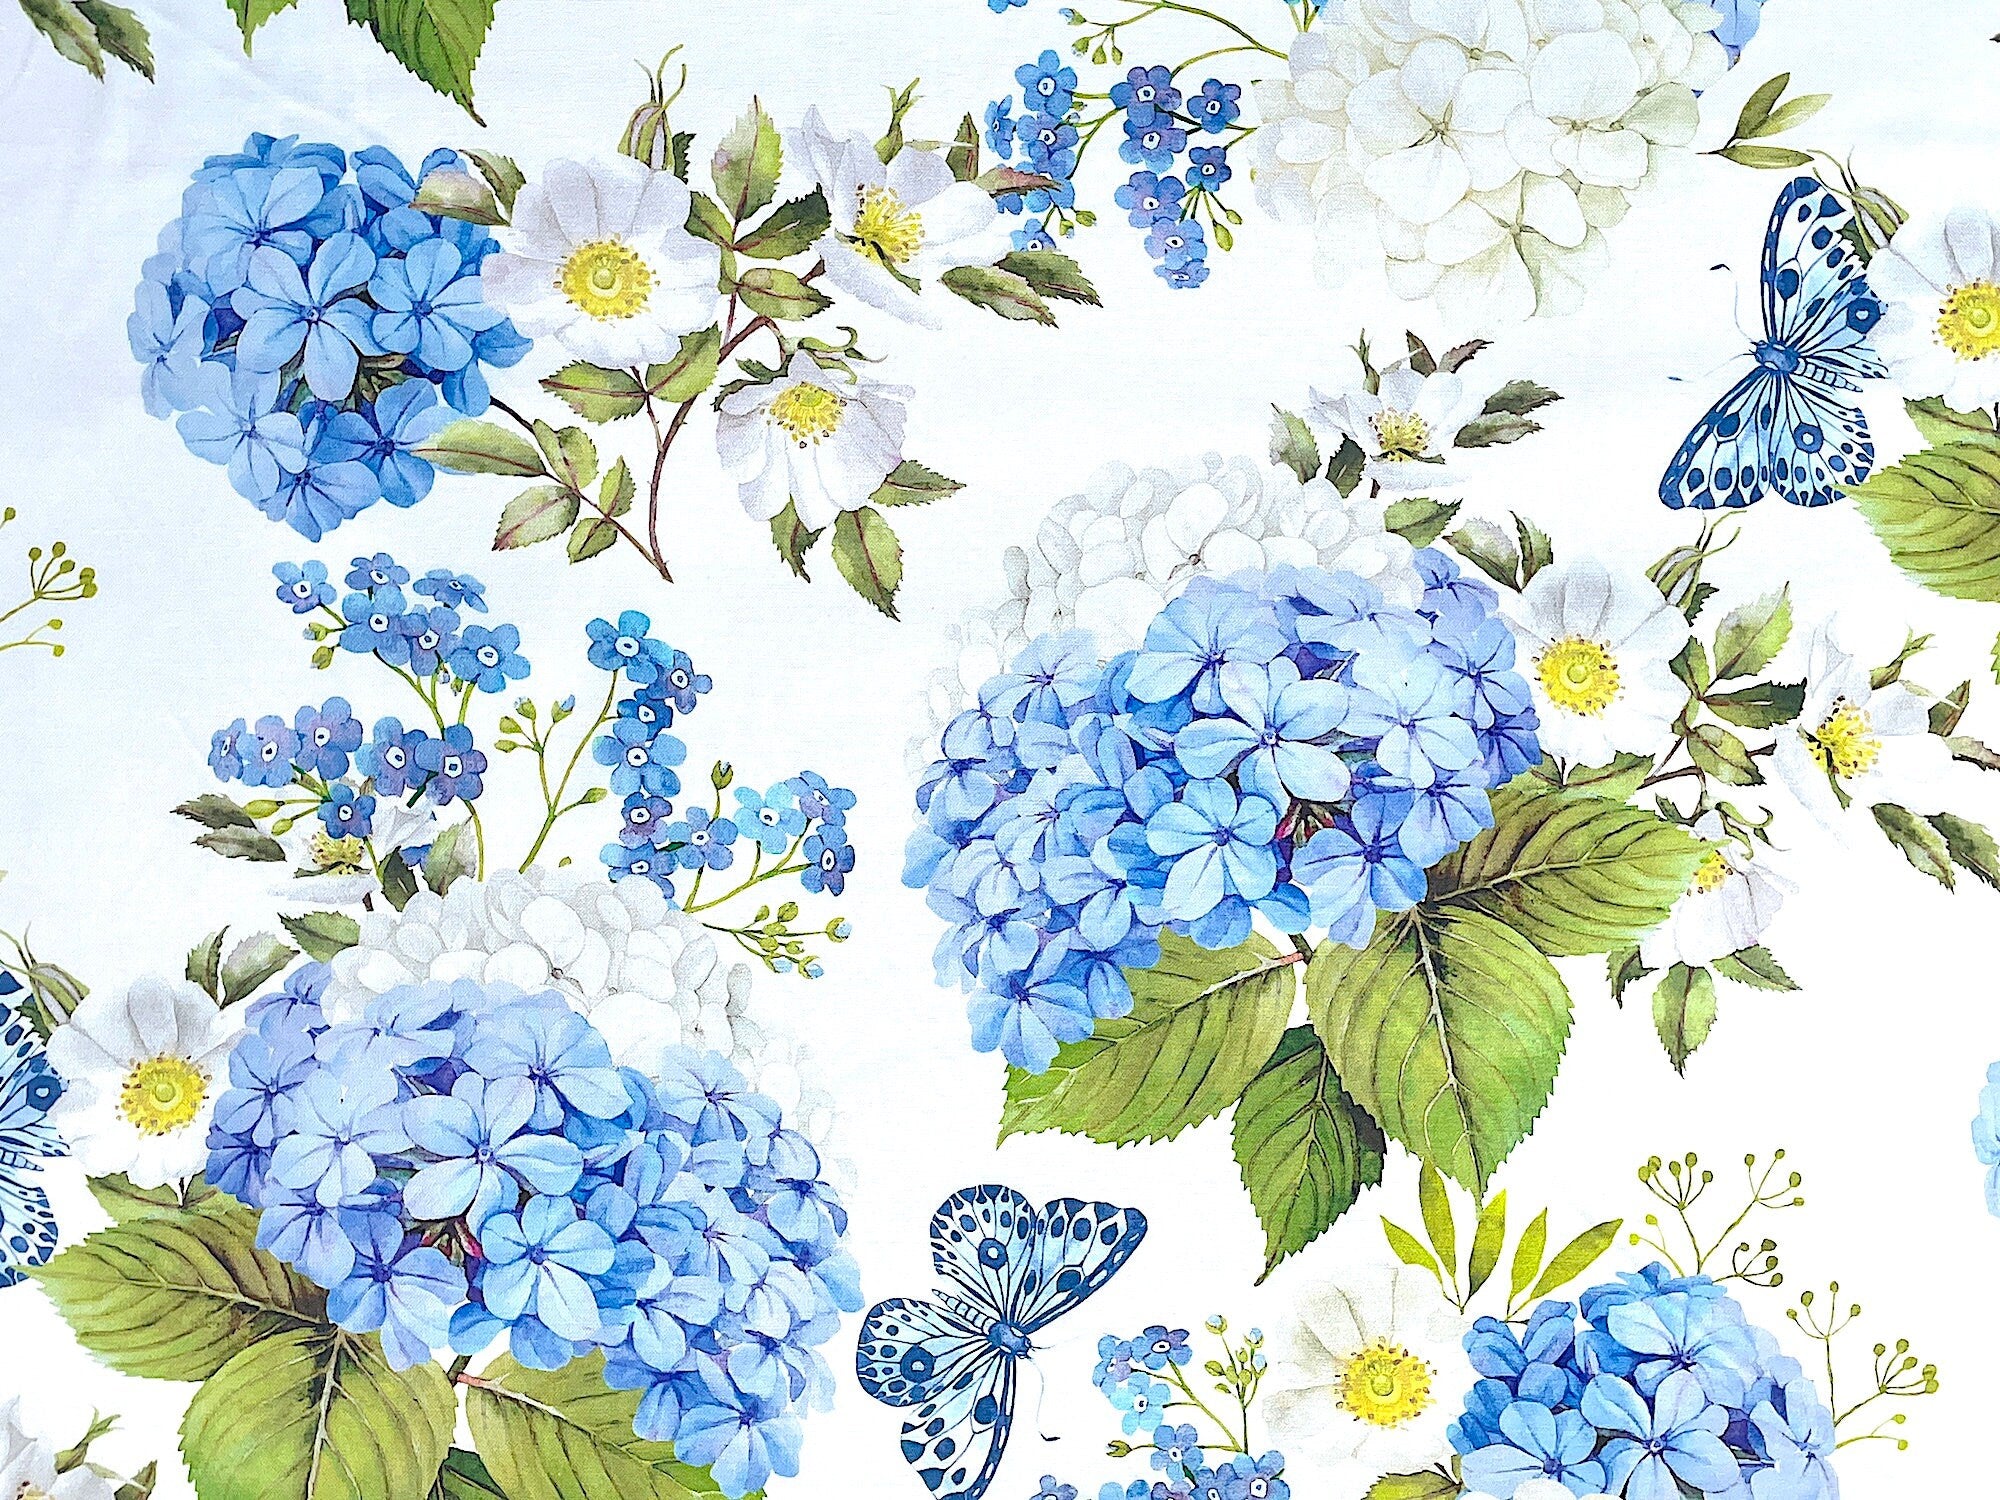 White cotton fabric covered with large blue and white hibiscus flowers and blue butterflies